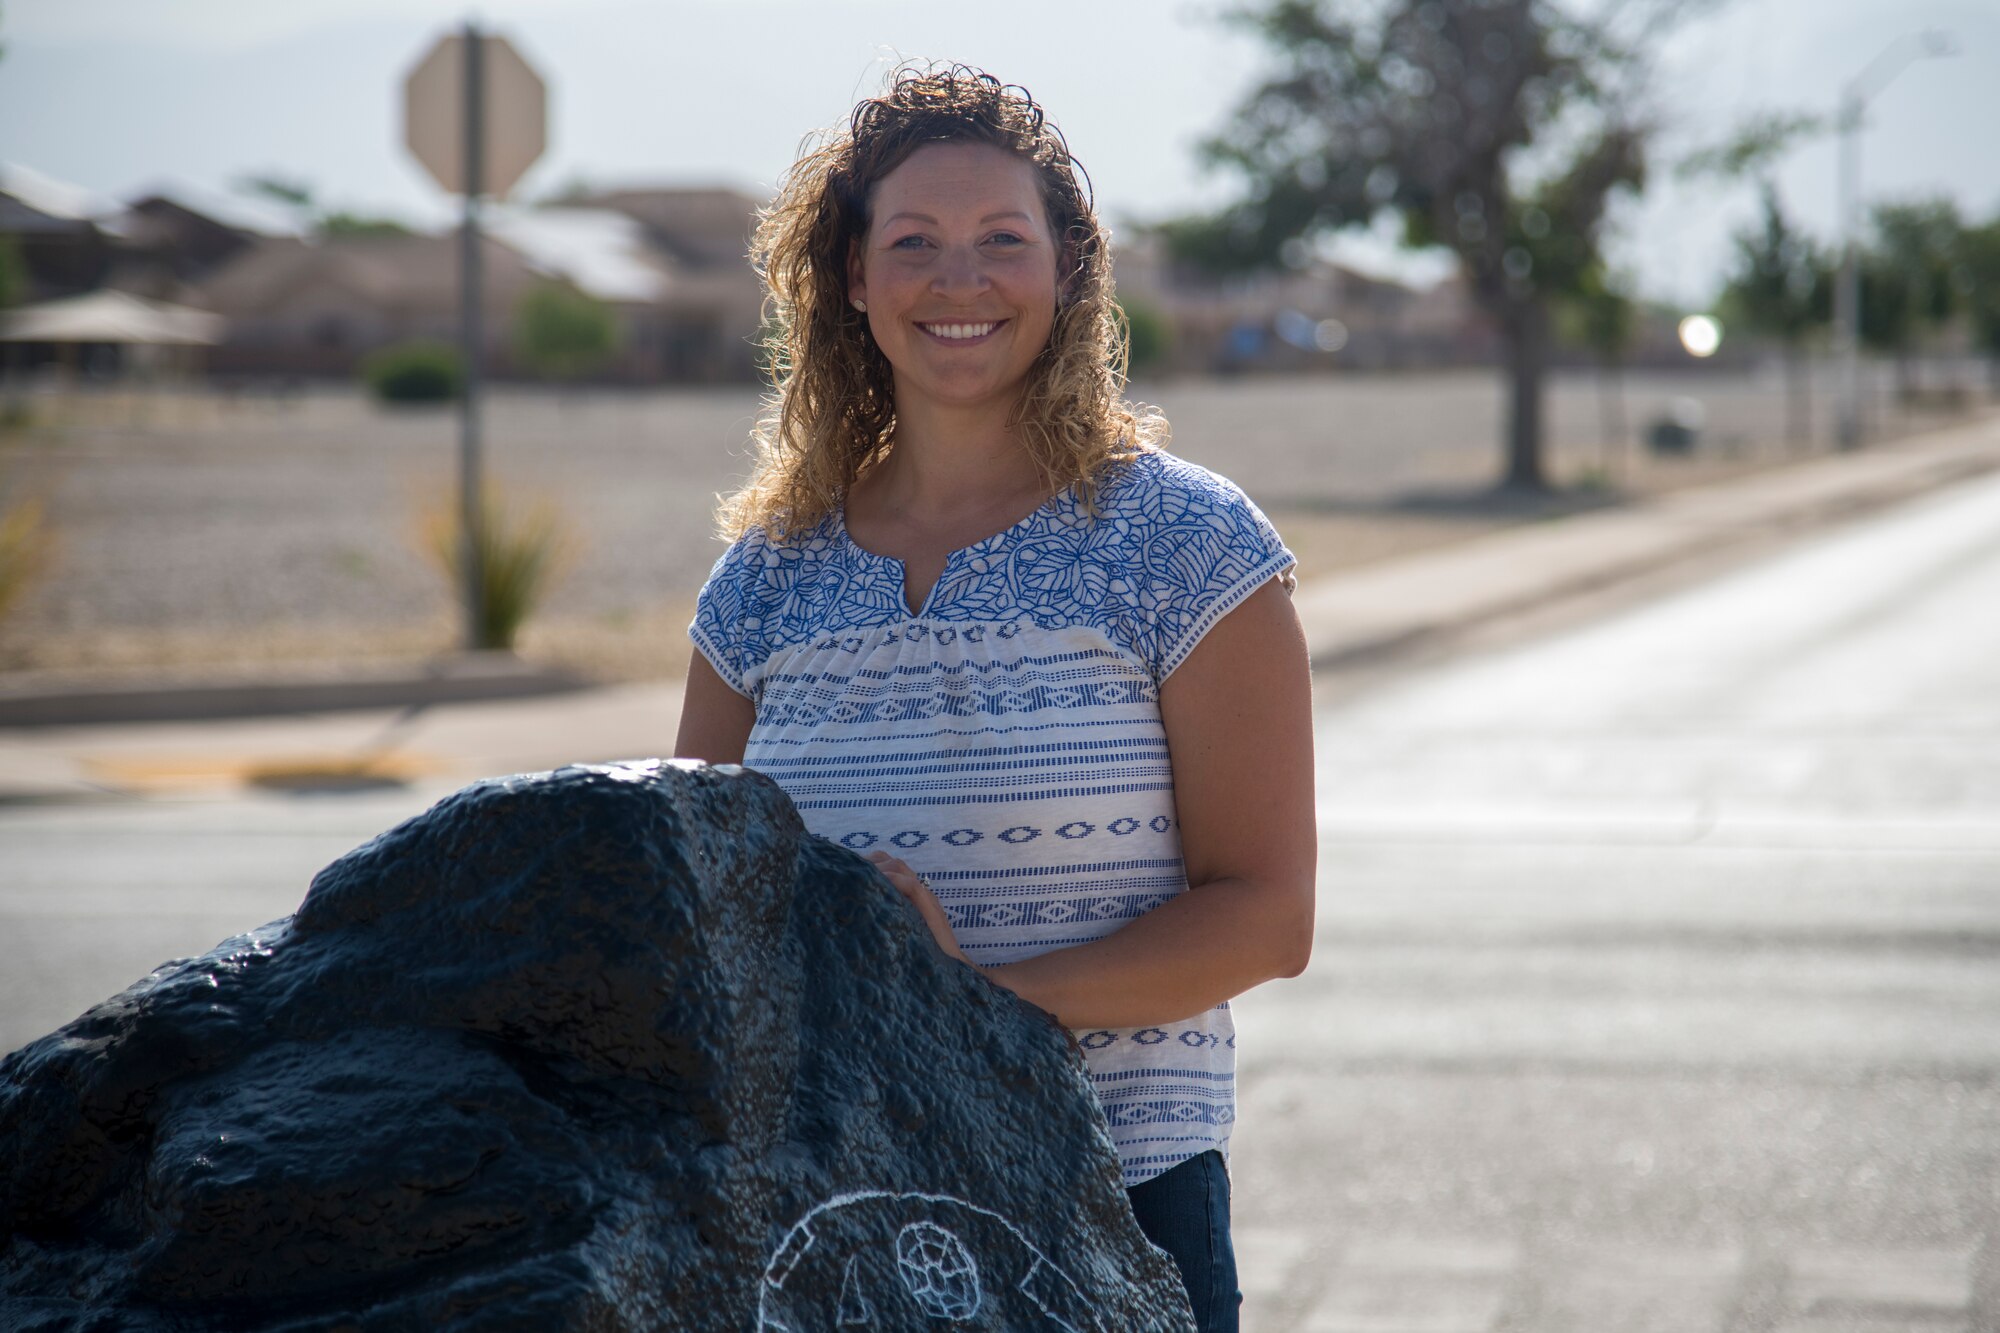 Maj. Naomi Donovan, 924th Aircraft Maintenance Squadron commander and 2018 49th Mission Support Group key spouse, poses for a photo at the “Holloman rock,” June 23, 2020, on Holloman Air Force Base, N.M. Donovan and her team use spray and acrylic paints to update the rock approximately every two weeks depending on what current events are taking place. (U.S. Air Force photo by Senior Airman Collette Brooks)